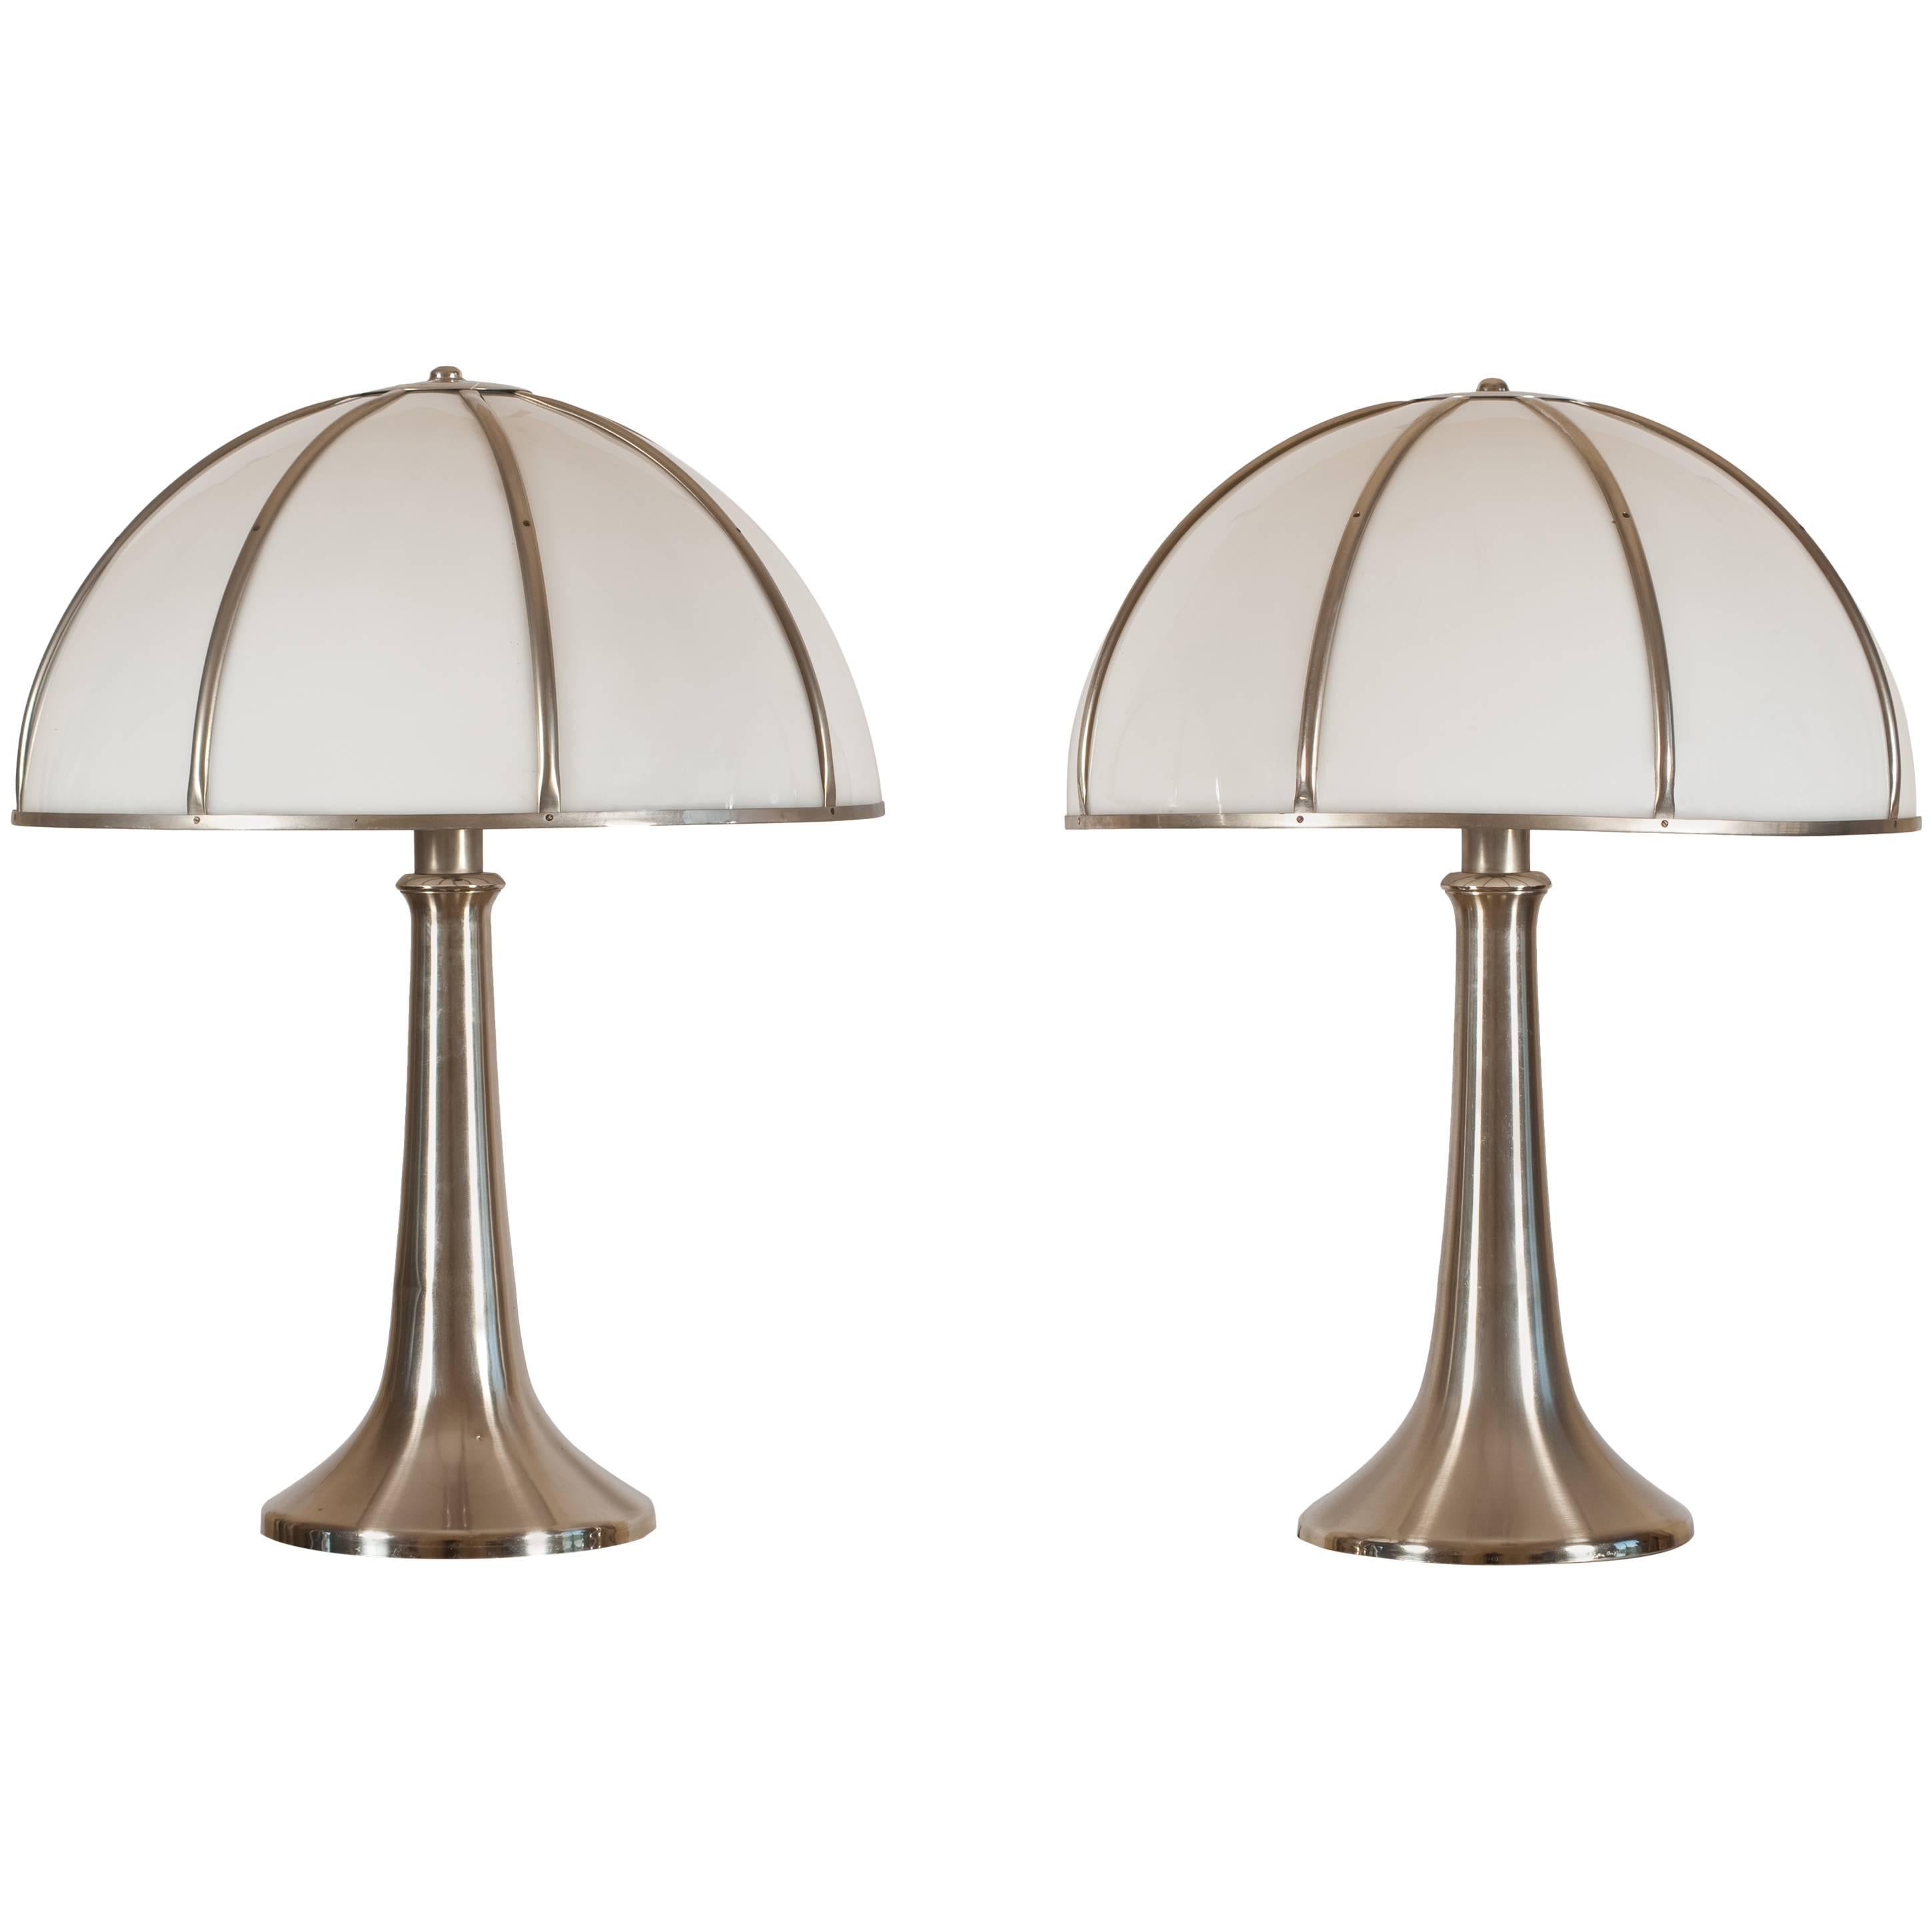 Charming Pair of Table Lamps by Gabriella Crespi